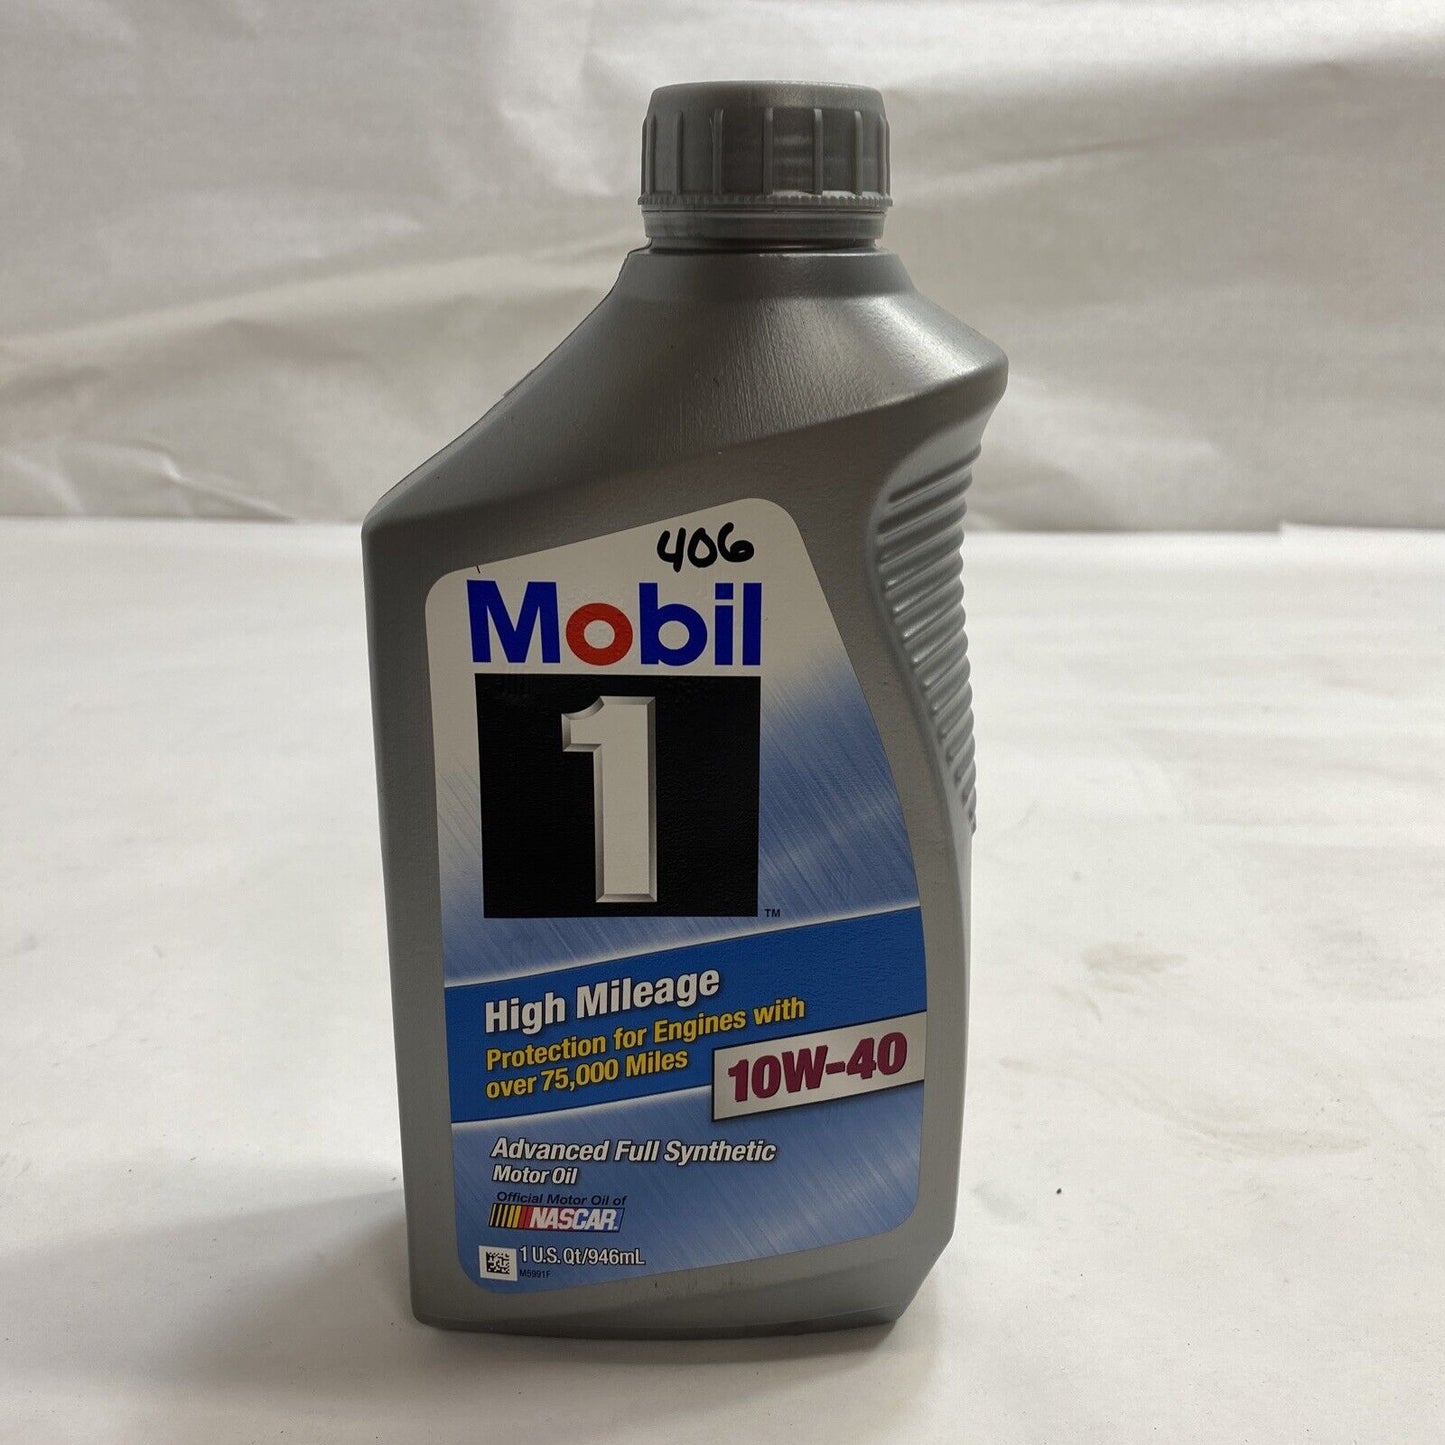 1 Mobil 1 10W-40 Motor Oil - High Mileage - 10W40 - Synthetic - 1 qt - Each